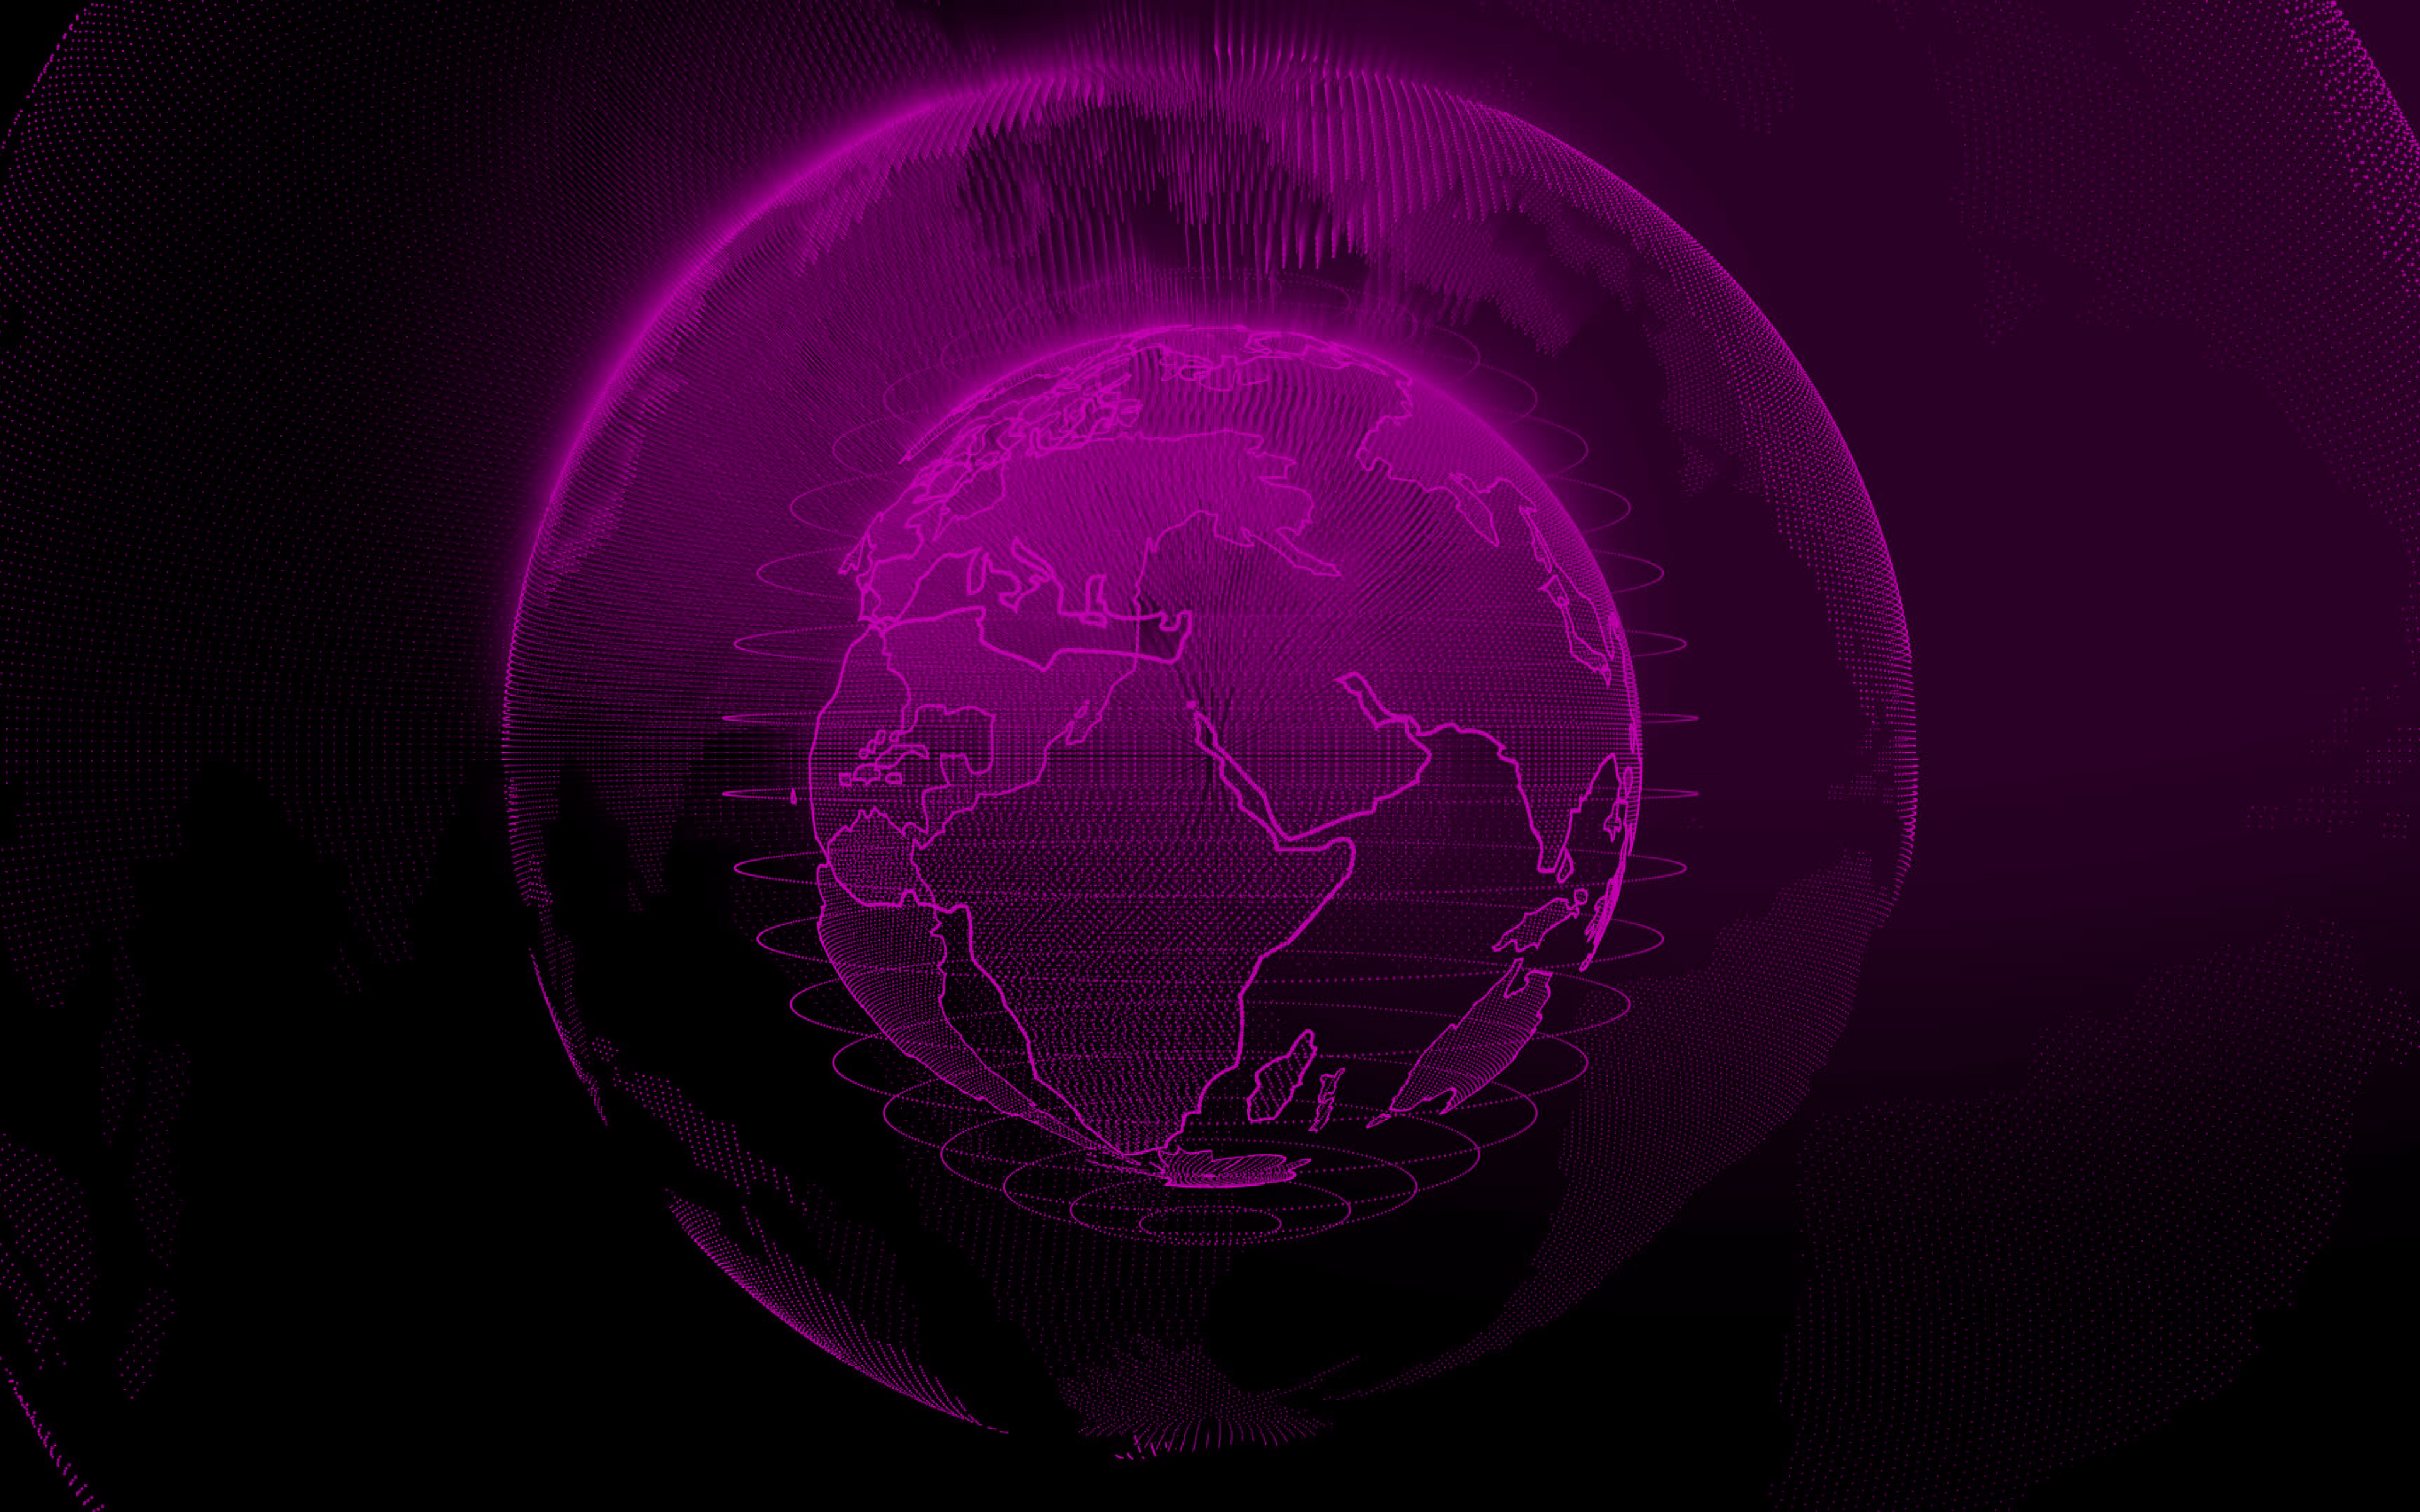 Download wallpaper purple digital globe, purple digital background, technology networks, global networks, dots globe silhouette, digital technology, purple technology background, world map for desktop with resolution 3840x2400. High Quality HD